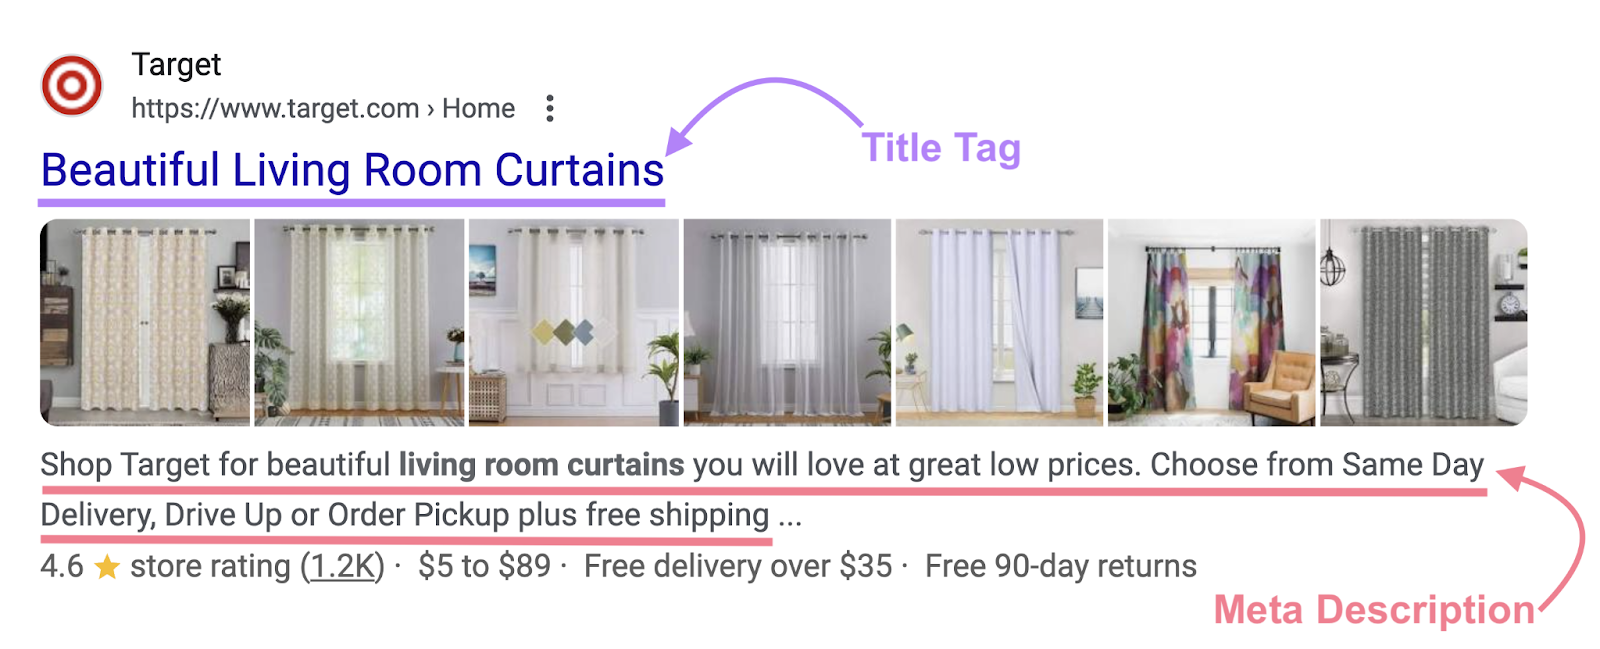 Title tag for Target's curtain listing is "Beautiful Living Room Curtains" and the meta description is highlighted beneath the curtain images.